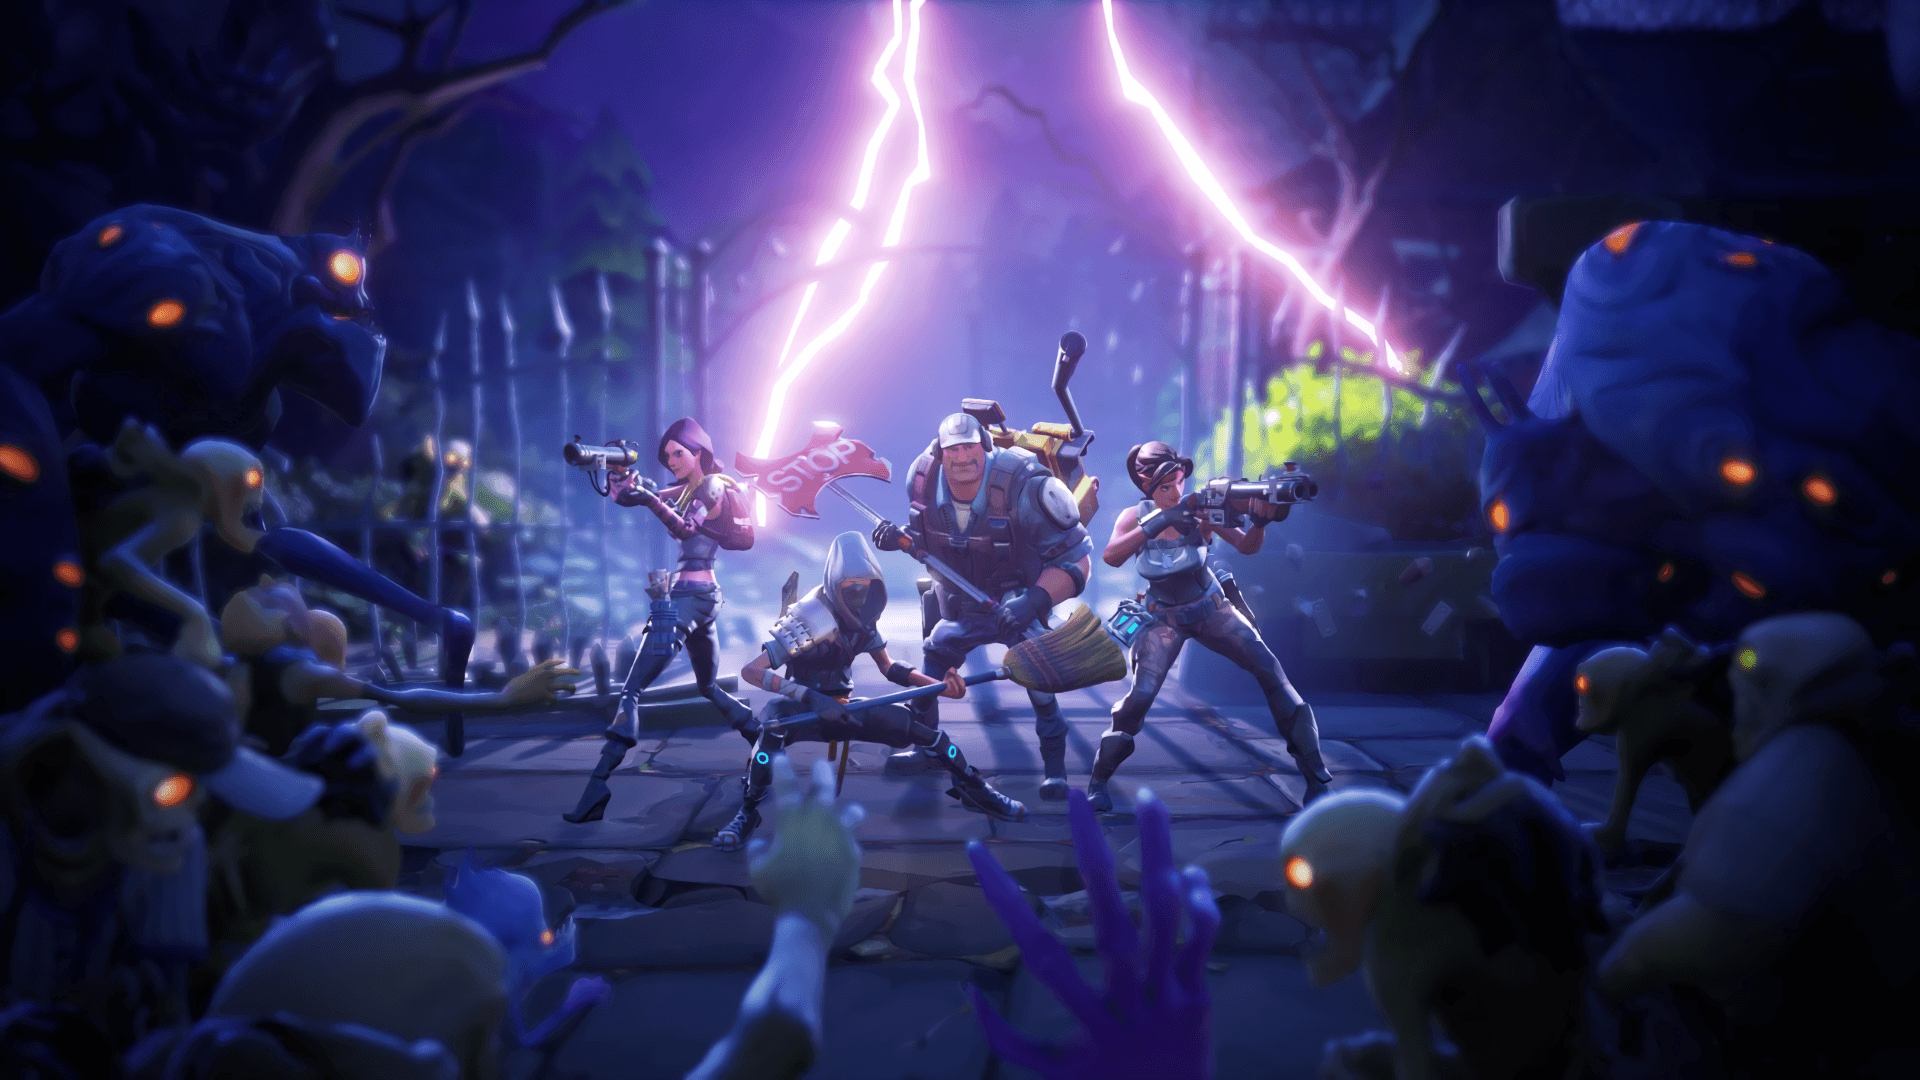 Fortnite Pc Wallpapers Top Free Fortnite Pc Backgrounds Wallpaperaccess